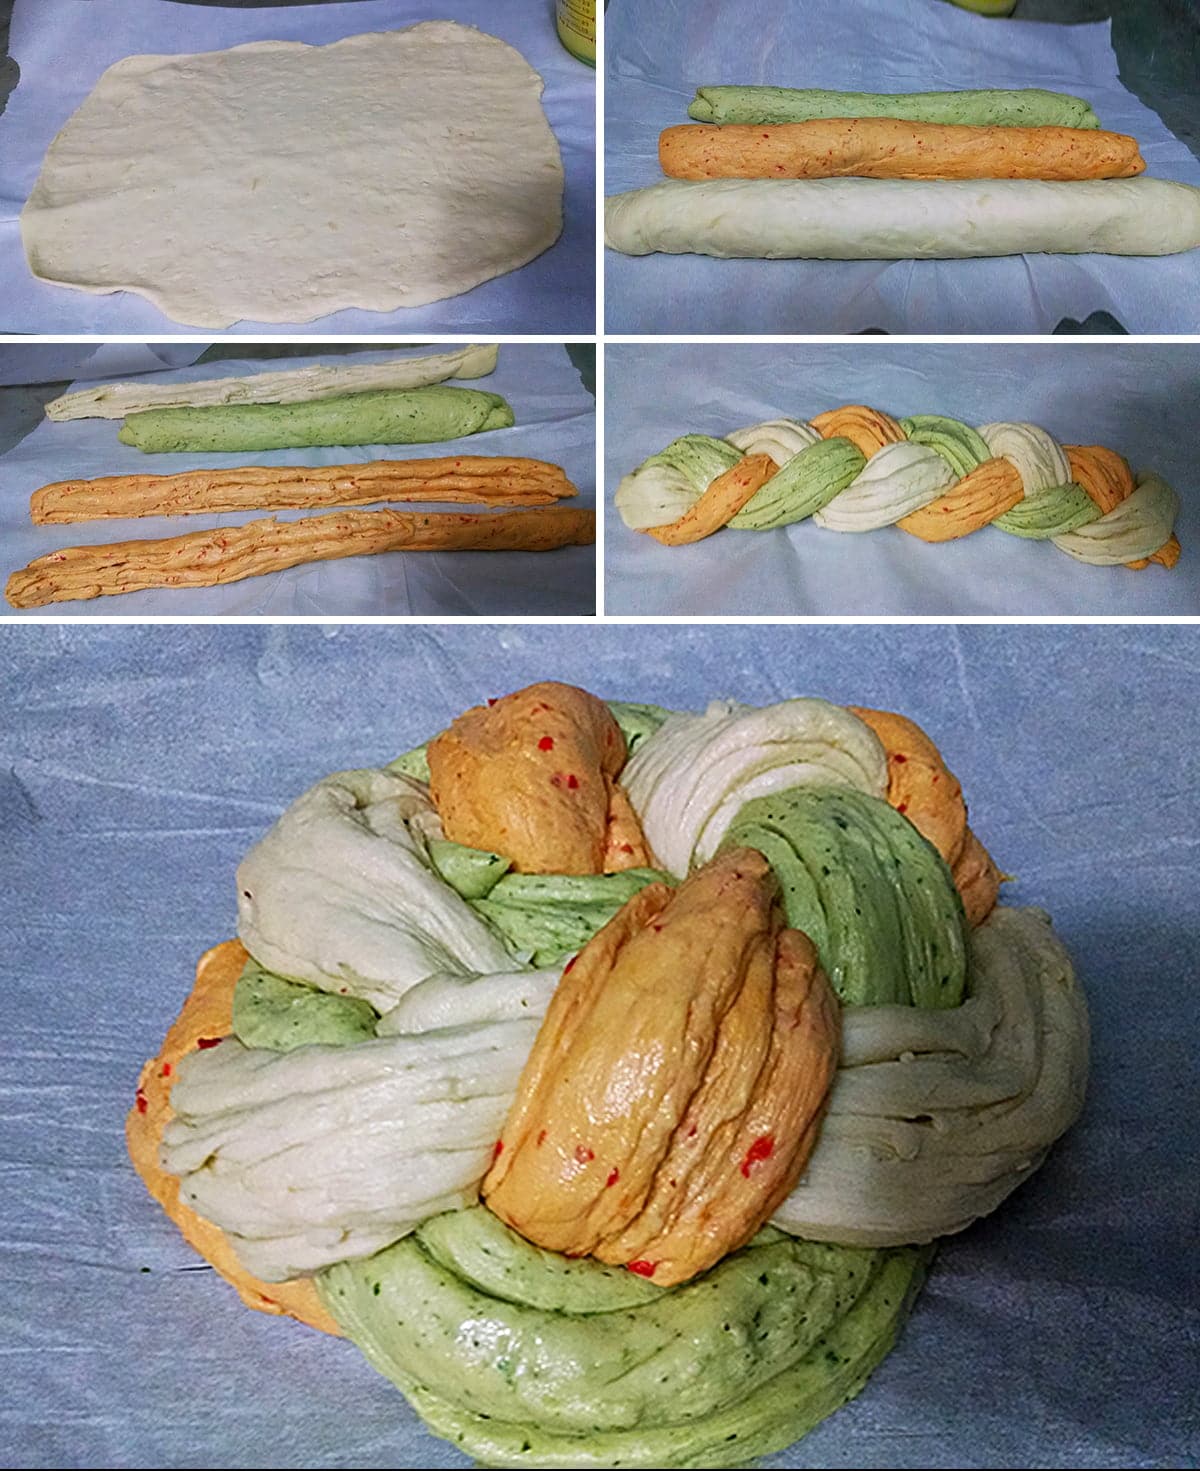 A 3 part compilation image showing the steps to roll and braid this bread, as described in the recipe card.